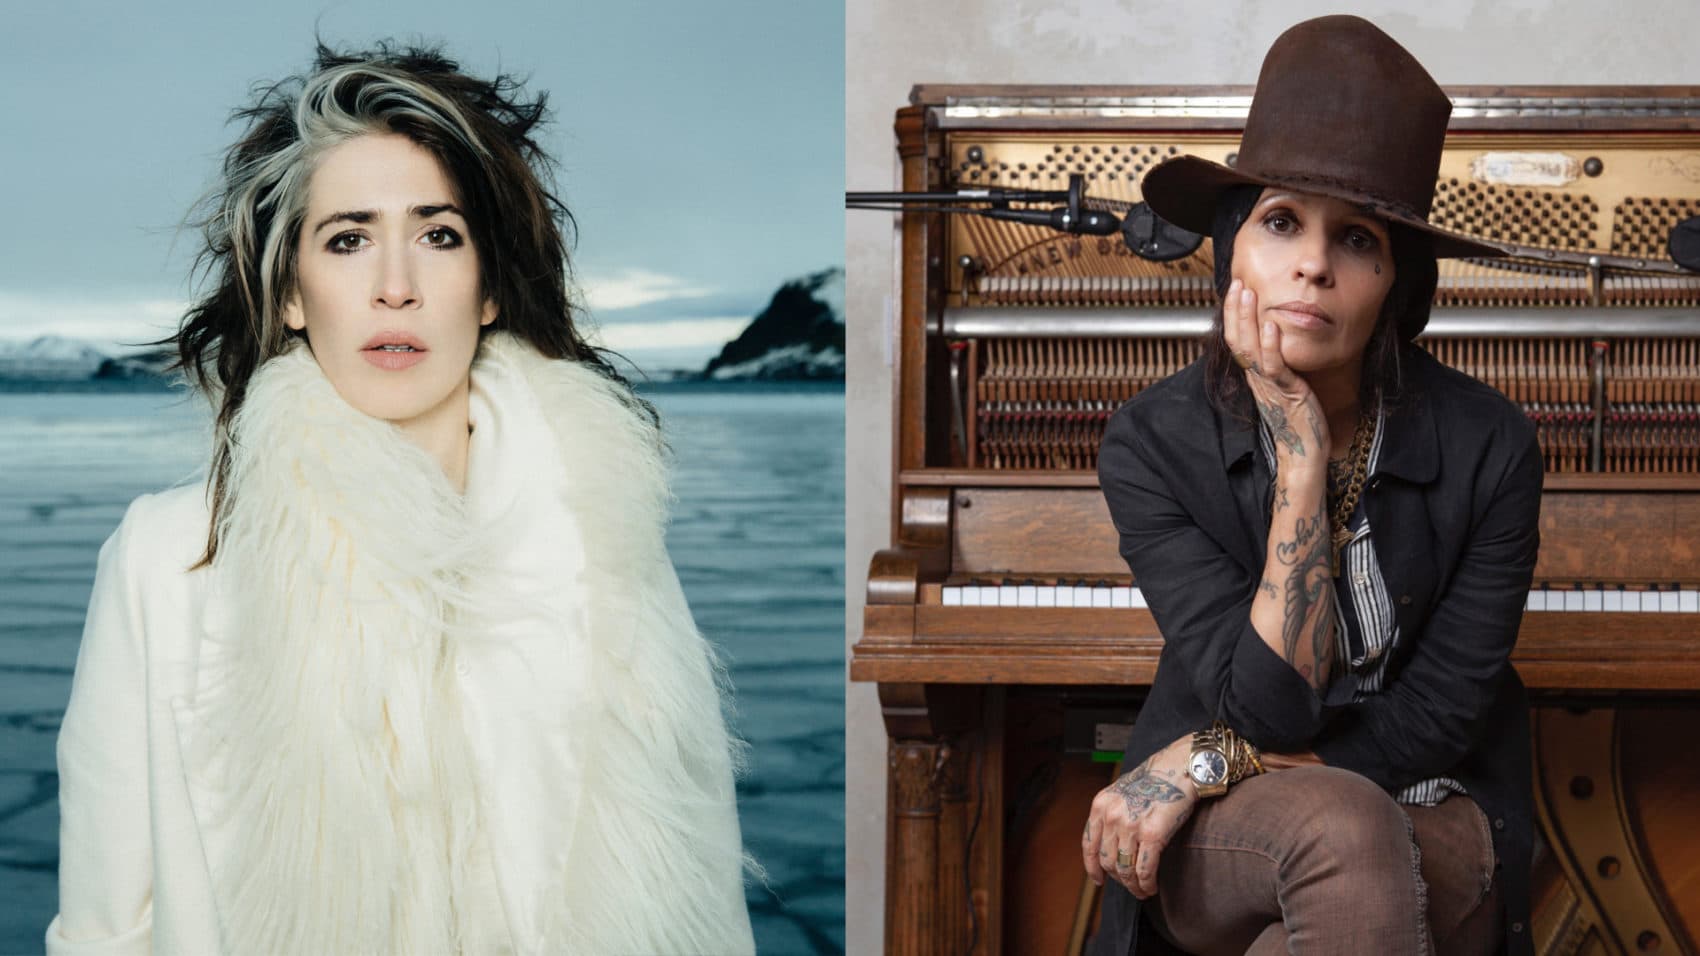 How Pioneers Linda Perry And Imogen Heap Are Trying To Foster Community And Artistry In The Music Industry Wbur News